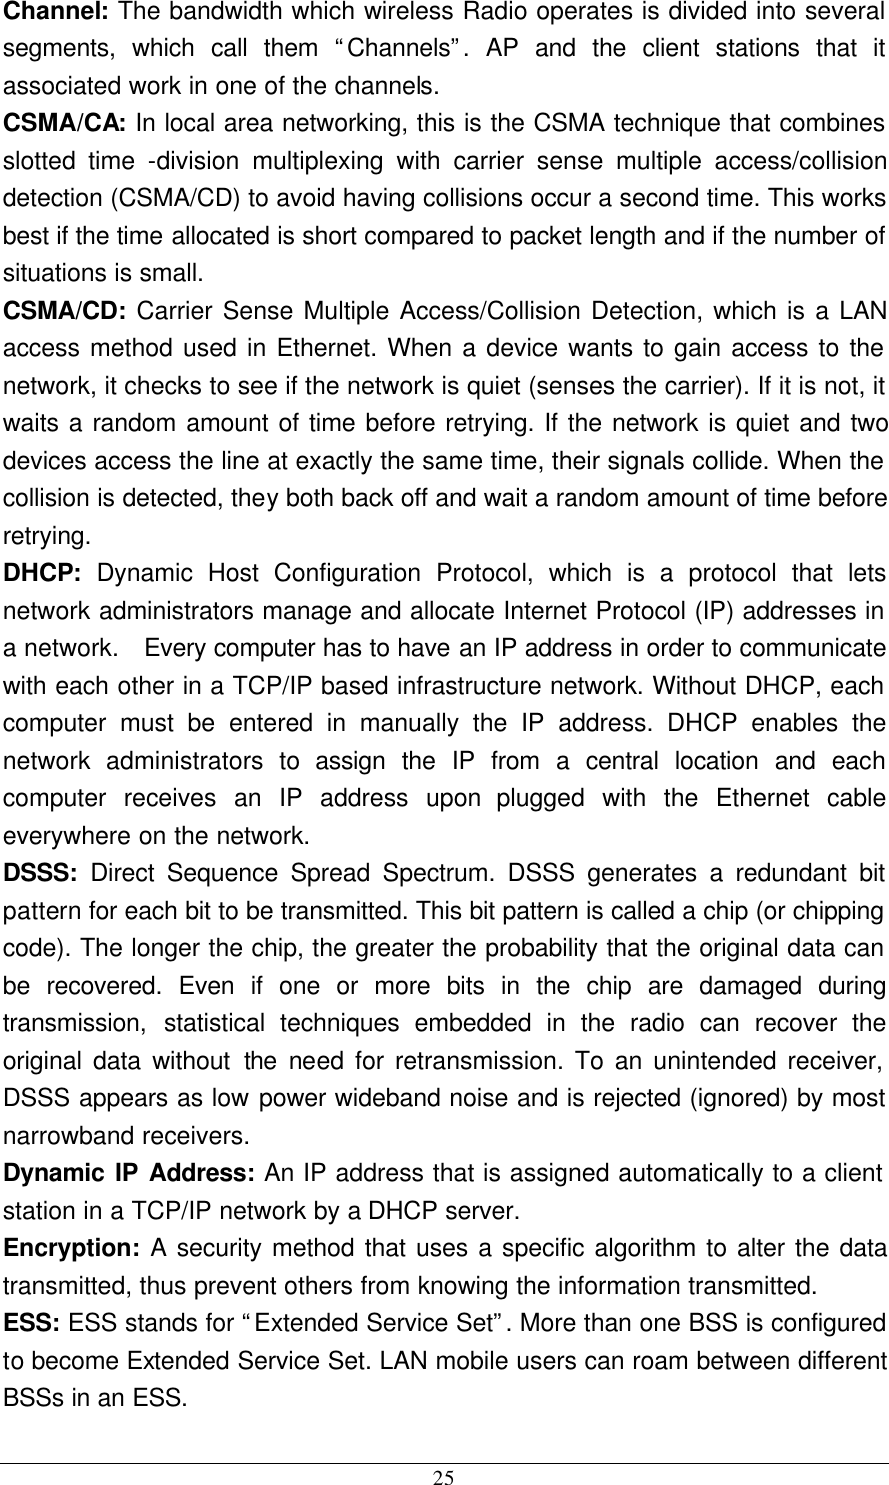  25 Channel: The bandwidth which wireless Radio operates is divided into several segments, which call them “Channels”. AP and the client stations that it associated work in one of the channels. CSMA/CA: In local area networking, this is the CSMA technique that combines slotted time -division multiplexing with carrier sense multiple access/collision detection (CSMA/CD) to avoid having collisions occur a second time. This works best if the time allocated is short compared to packet length and if the number of situations is small. CSMA/CD: Carrier Sense Multiple Access/Collision Detection, which is a LAN access method used in Ethernet. When a device wants to gain access to the network, it checks to see if the network is quiet (senses the carrier). If it is not, it waits a random amount of time before retrying. If the network is quiet and two devices access the line at exactly the same time, their signals collide. When the collision is detected, they both back off and wait a random amount of time before retrying. DHCP: Dynamic Host Configuration Protocol, which is a protocol that lets network administrators manage and allocate Internet Protocol (IP) addresses in a network.  Every computer has to have an IP address in order to communicate with each other in a TCP/IP based infrastructure network. Without DHCP, each computer must be entered in manually the IP address. DHCP enables the network administrators to assign the IP from a central location and each computer receives an IP address upon plugged with the Ethernet cable everywhere on the network. DSSS:  Direct Sequence Spread Spectrum. DSSS generates a redundant bit pattern for each bit to be transmitted. This bit pattern is called a chip (or chipping code). The longer the chip, the greater the probability that the original data can be recovered. Even if one or more bits in the chip are damaged during transmission, statistical techniques embedded in the radio can recover the original data without the need for retransmission. To an unintended receiver, DSSS appears as low power wideband noise and is rejected (ignored) by most narrowband receivers. Dynamic IP Address: An IP address that is assigned automatically to a client station in a TCP/IP network by a DHCP server. Encryption: A security method that uses a specific algorithm to alter the data transmitted, thus prevent others from knowing the information transmitted. ESS: ESS stands for “Extended Service Set”. More than one BSS is configured to become Extended Service Set. LAN mobile users can roam between different BSSs in an ESS. 